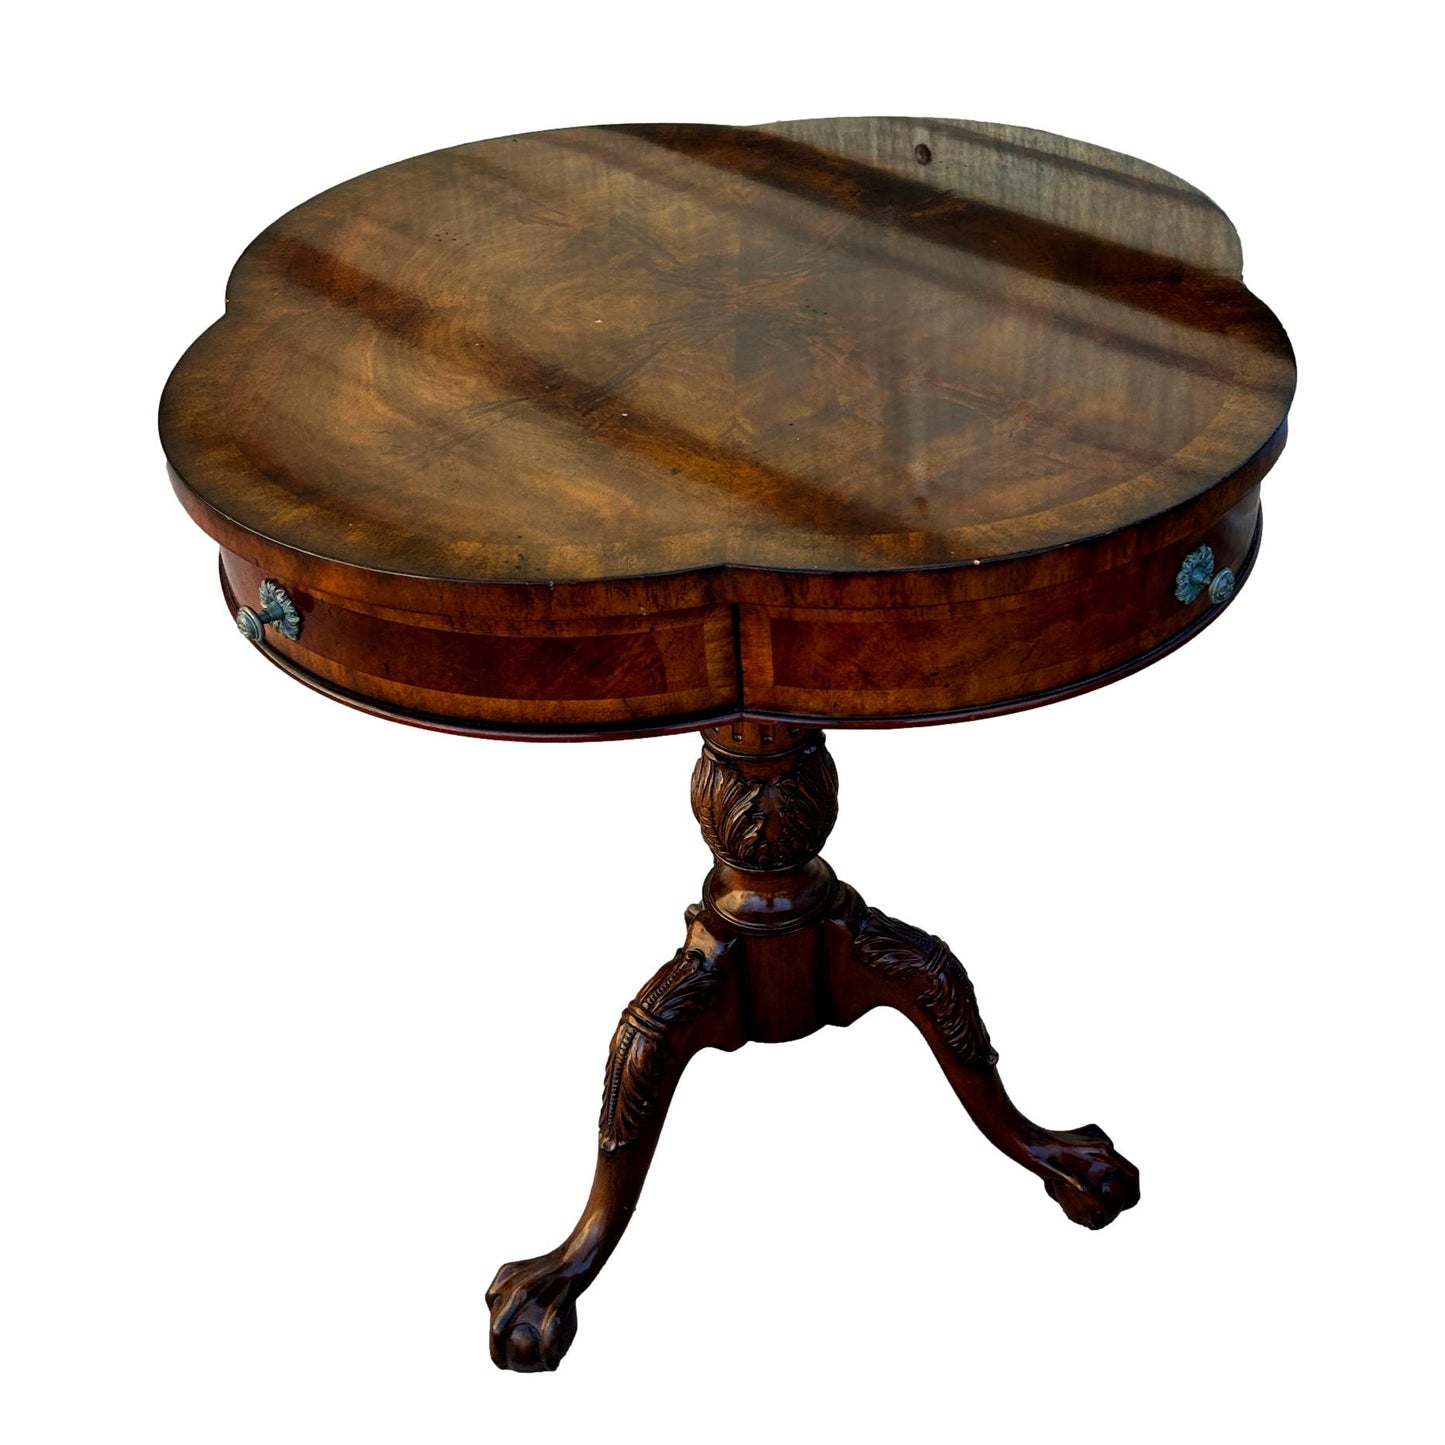 Clover Shaped Drum Table